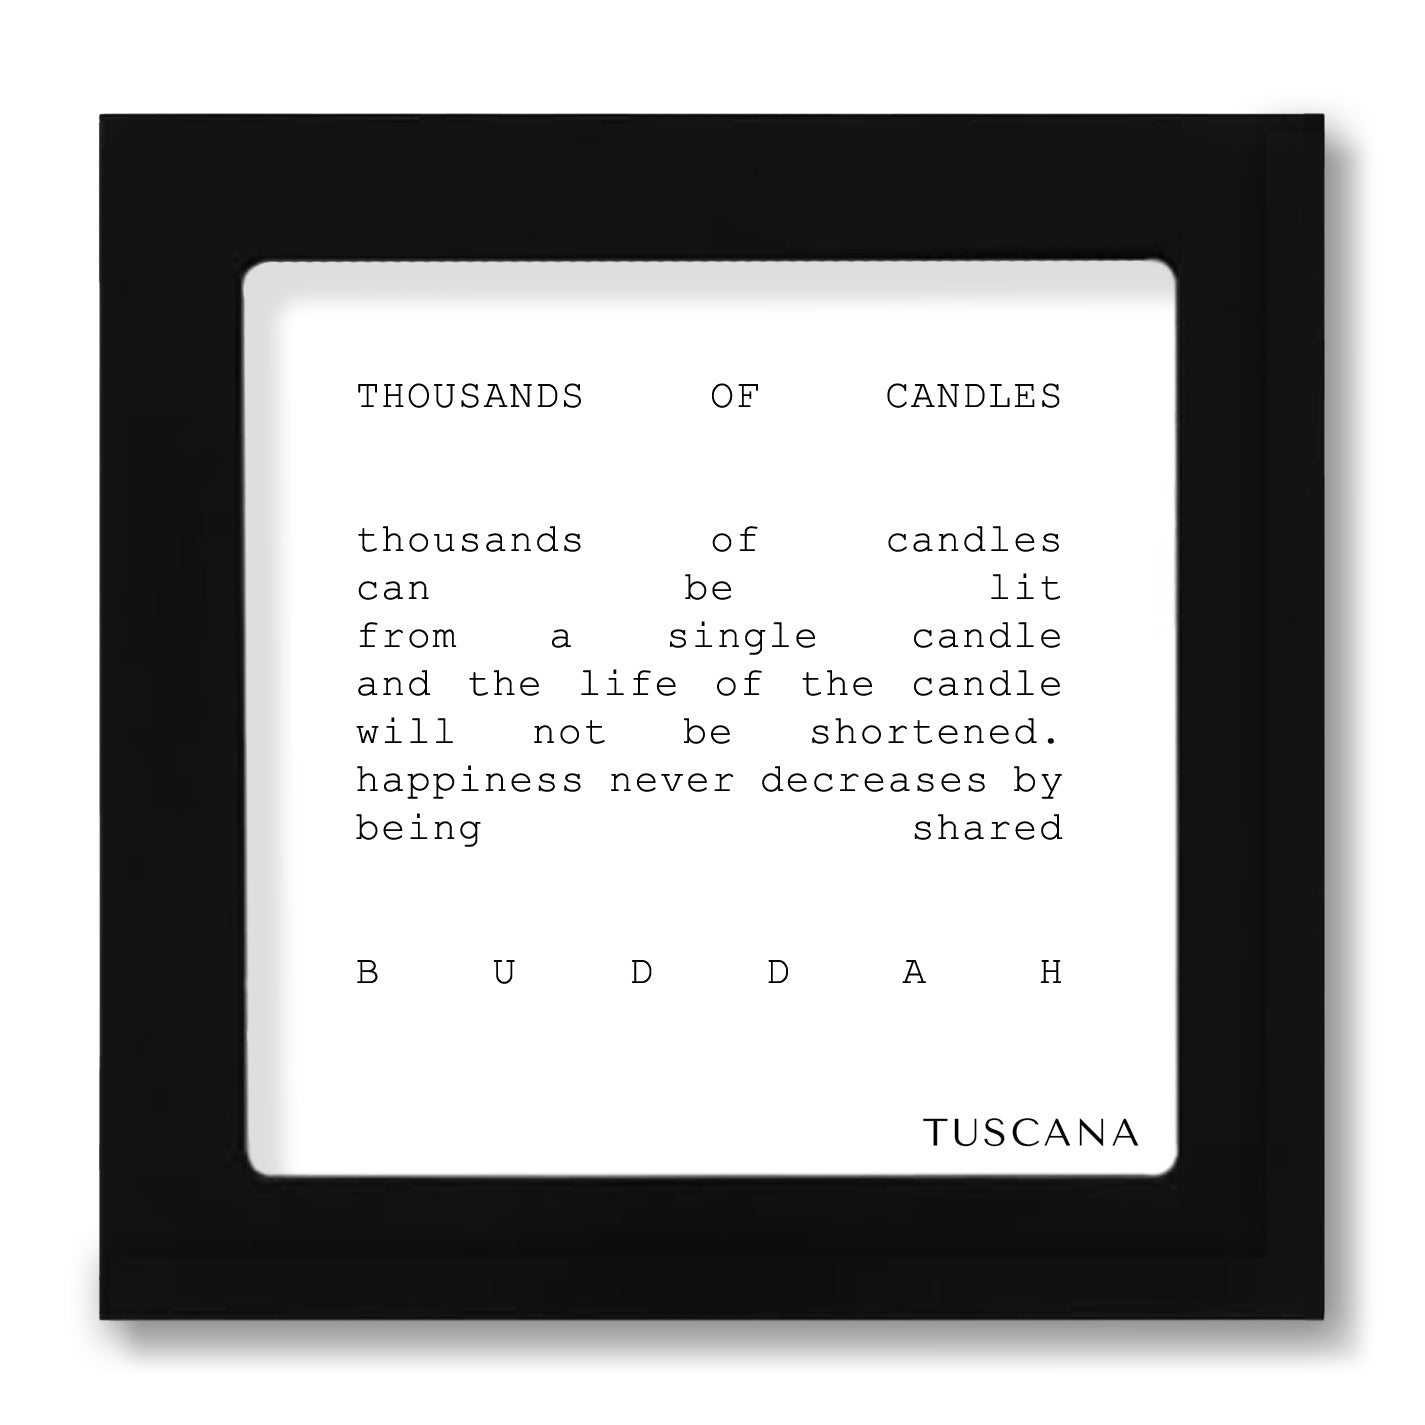 "THOUSANDS OF CANDLES" BY BUDDHA